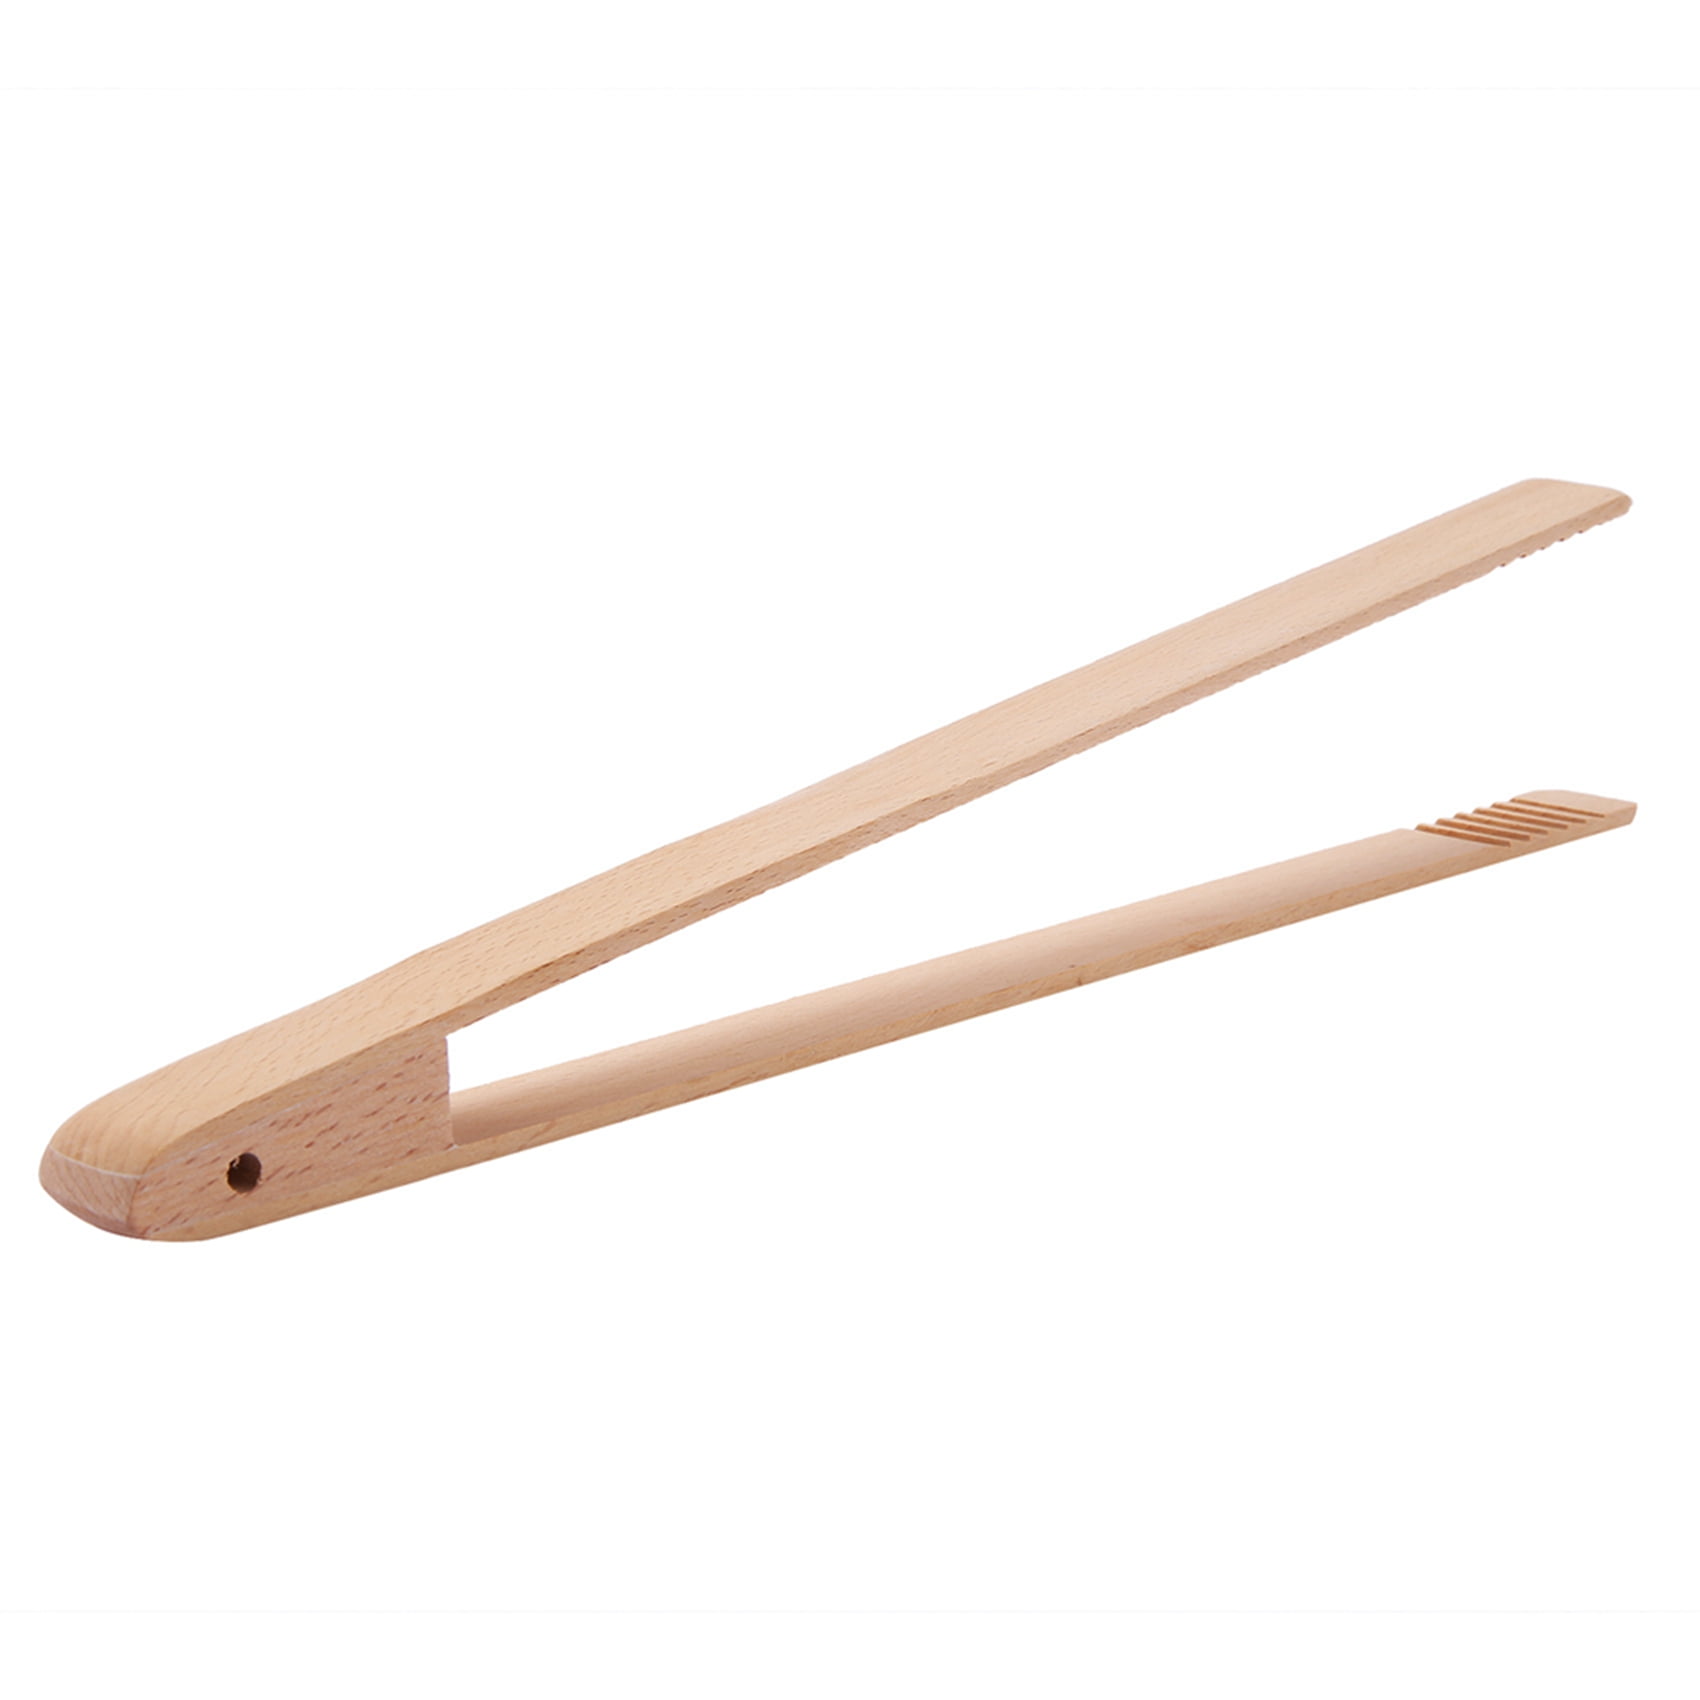 4 Packs 12 Inch Wood Toaster Tongs Kitchen Tongs for Serving Food ...